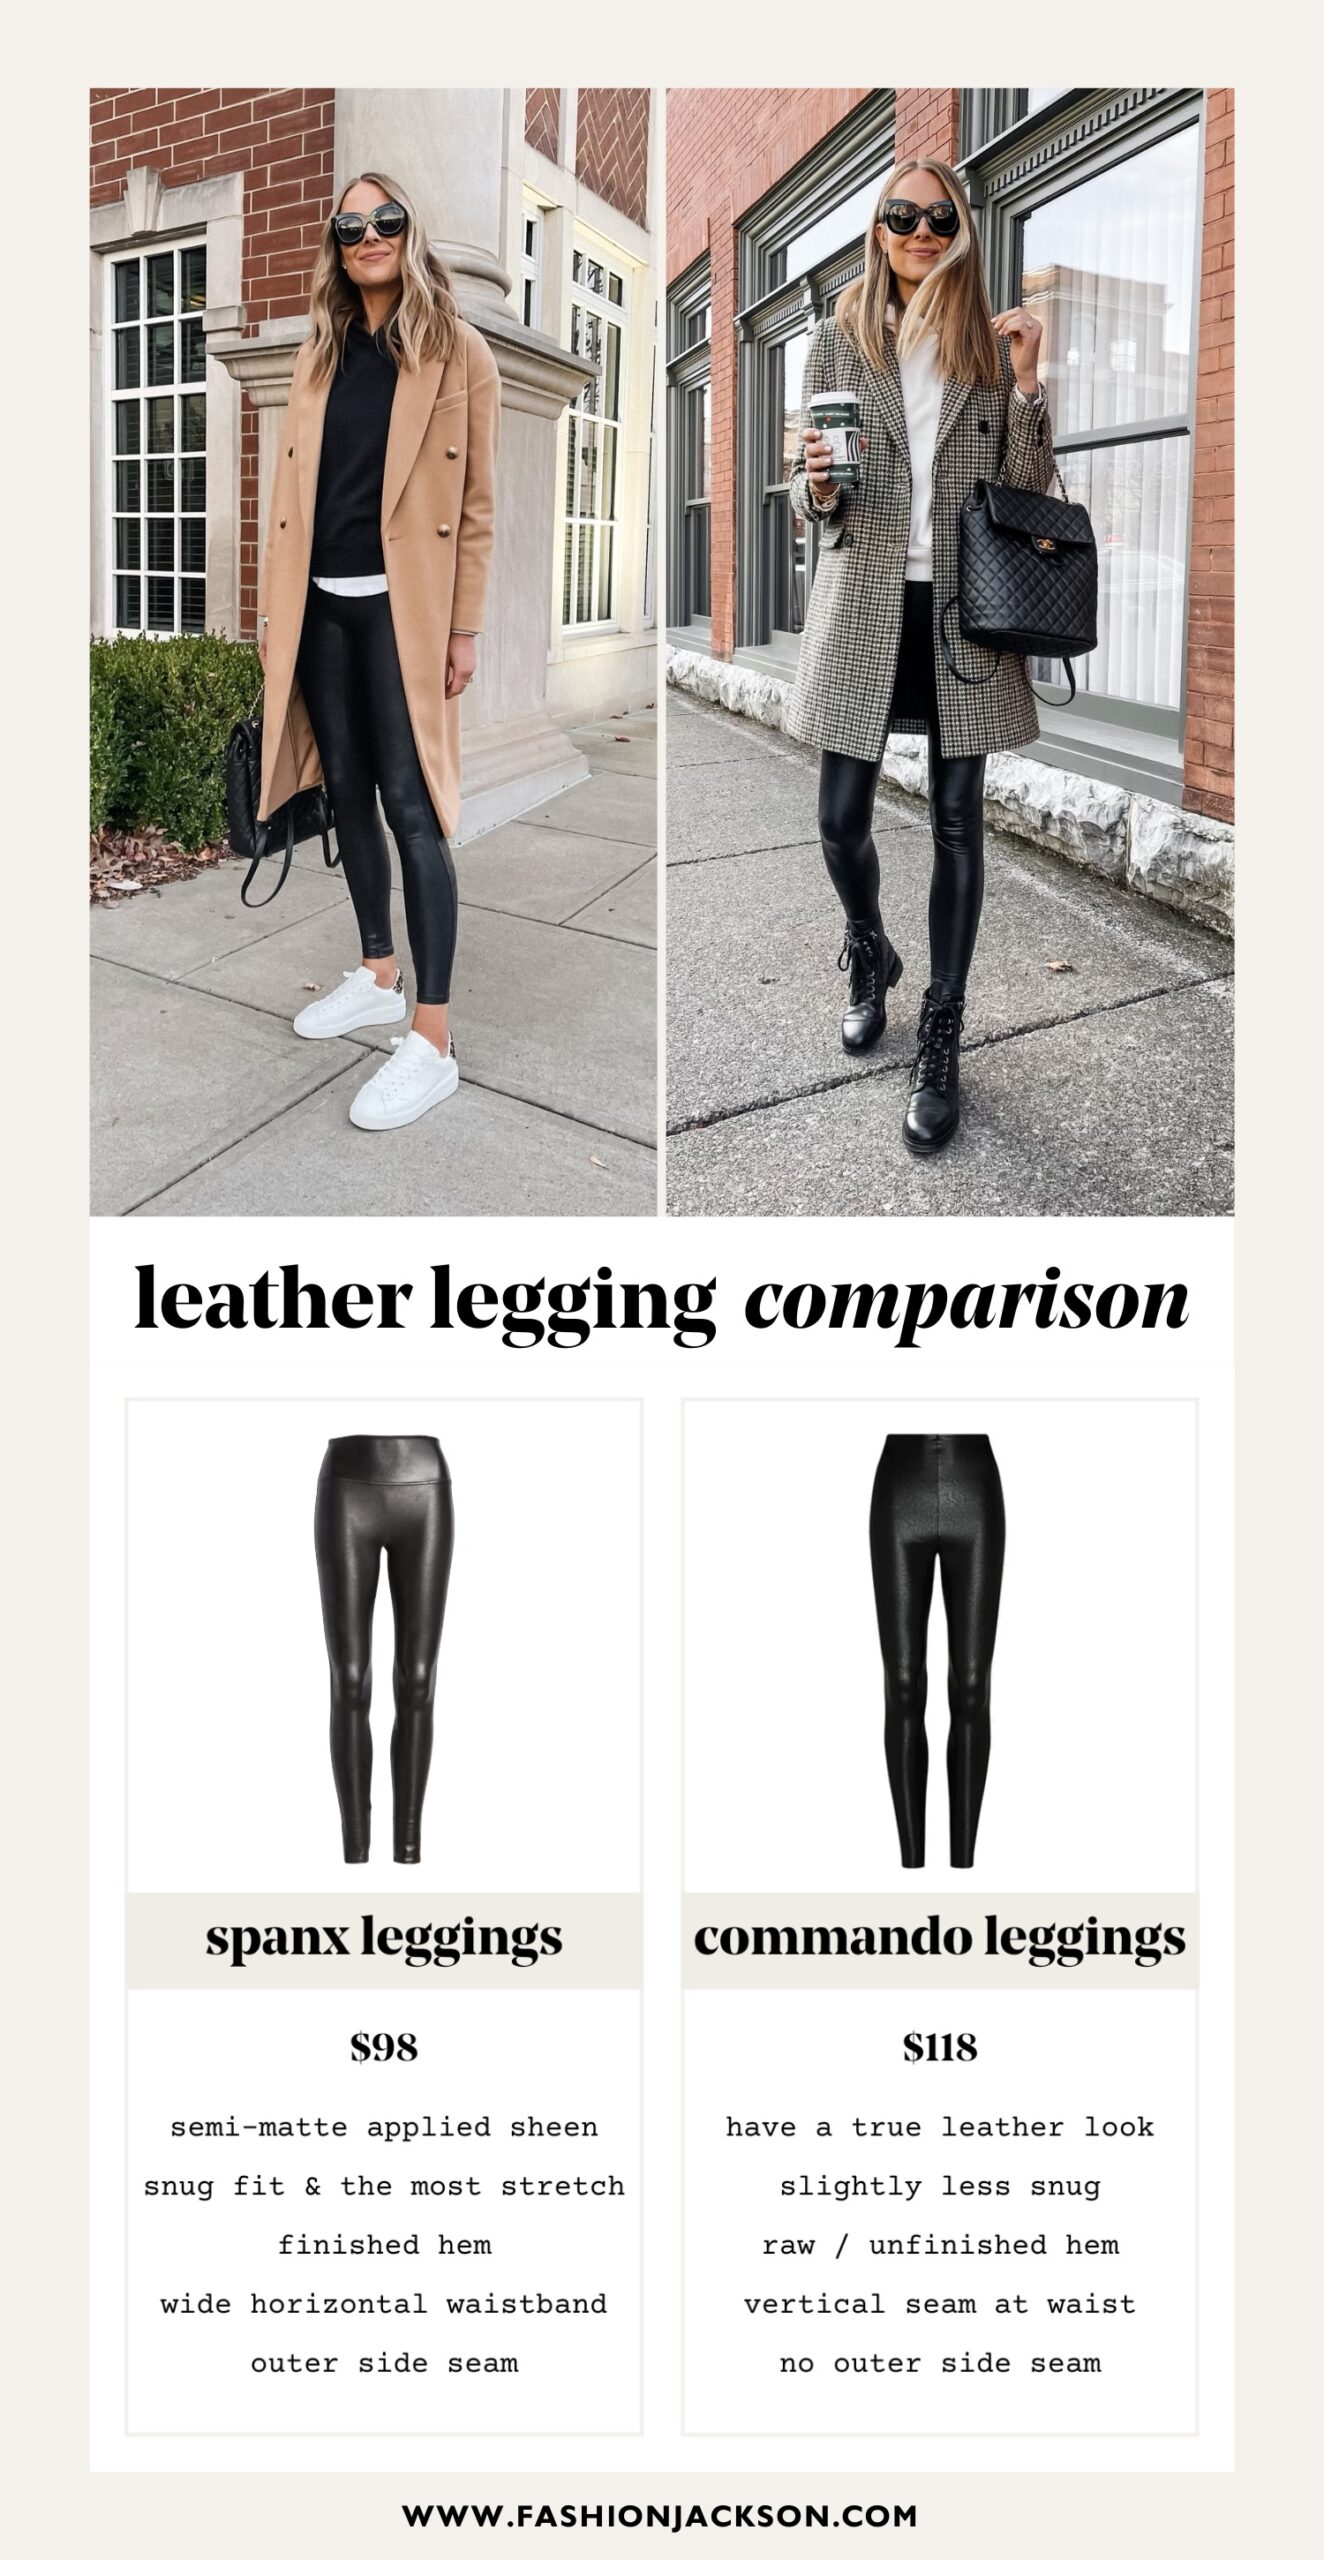 Share more than 130 spanx petite faux leather leggings latest - kenmei ...